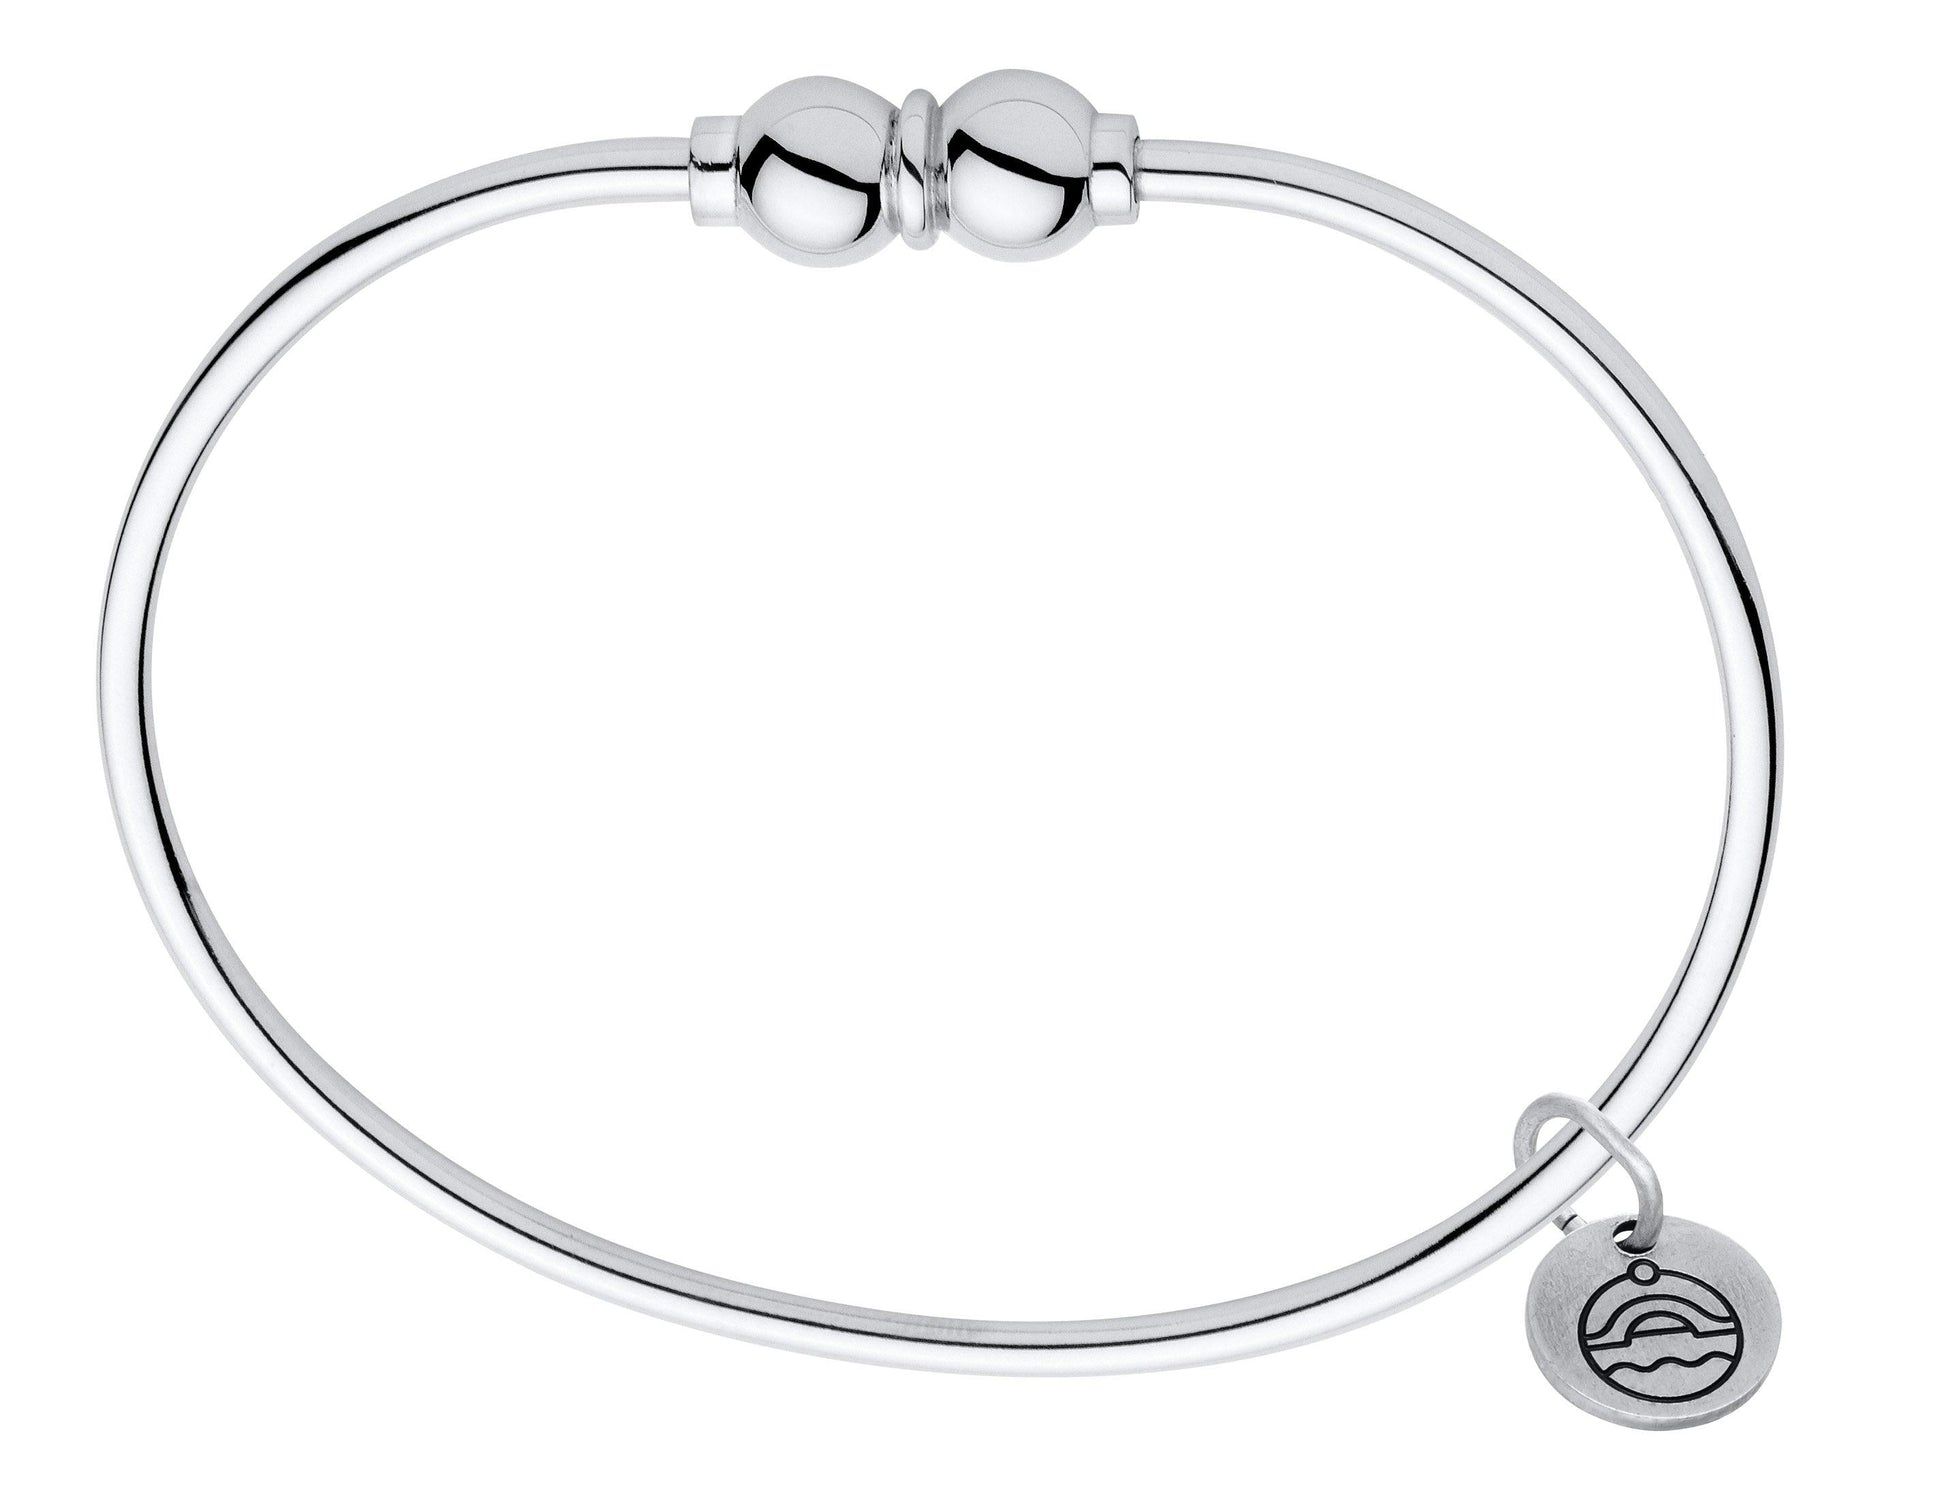 Plain sterling silver Cape Cod bangle bracelet with two twistable silver balls. Comes with an engraving of the Cape Cod jewelry design logo on a silver circle attached to a jump ring.